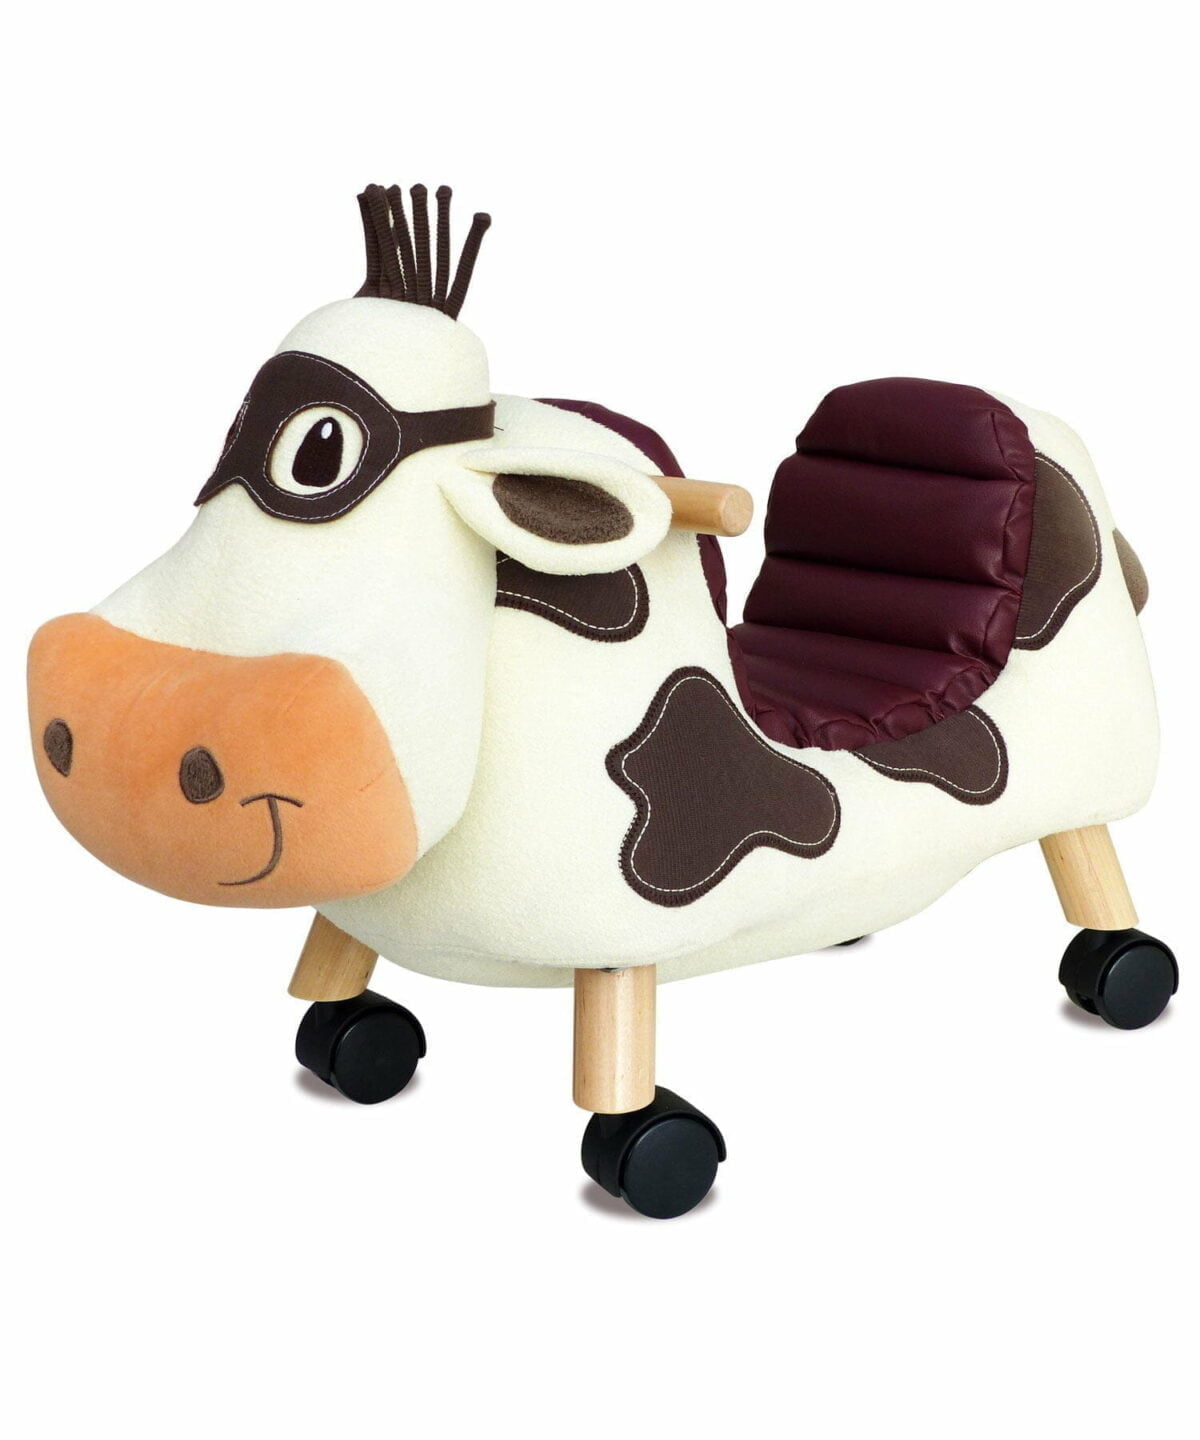 Moobert Cow Ride On Toy with supportive seat for toddlers